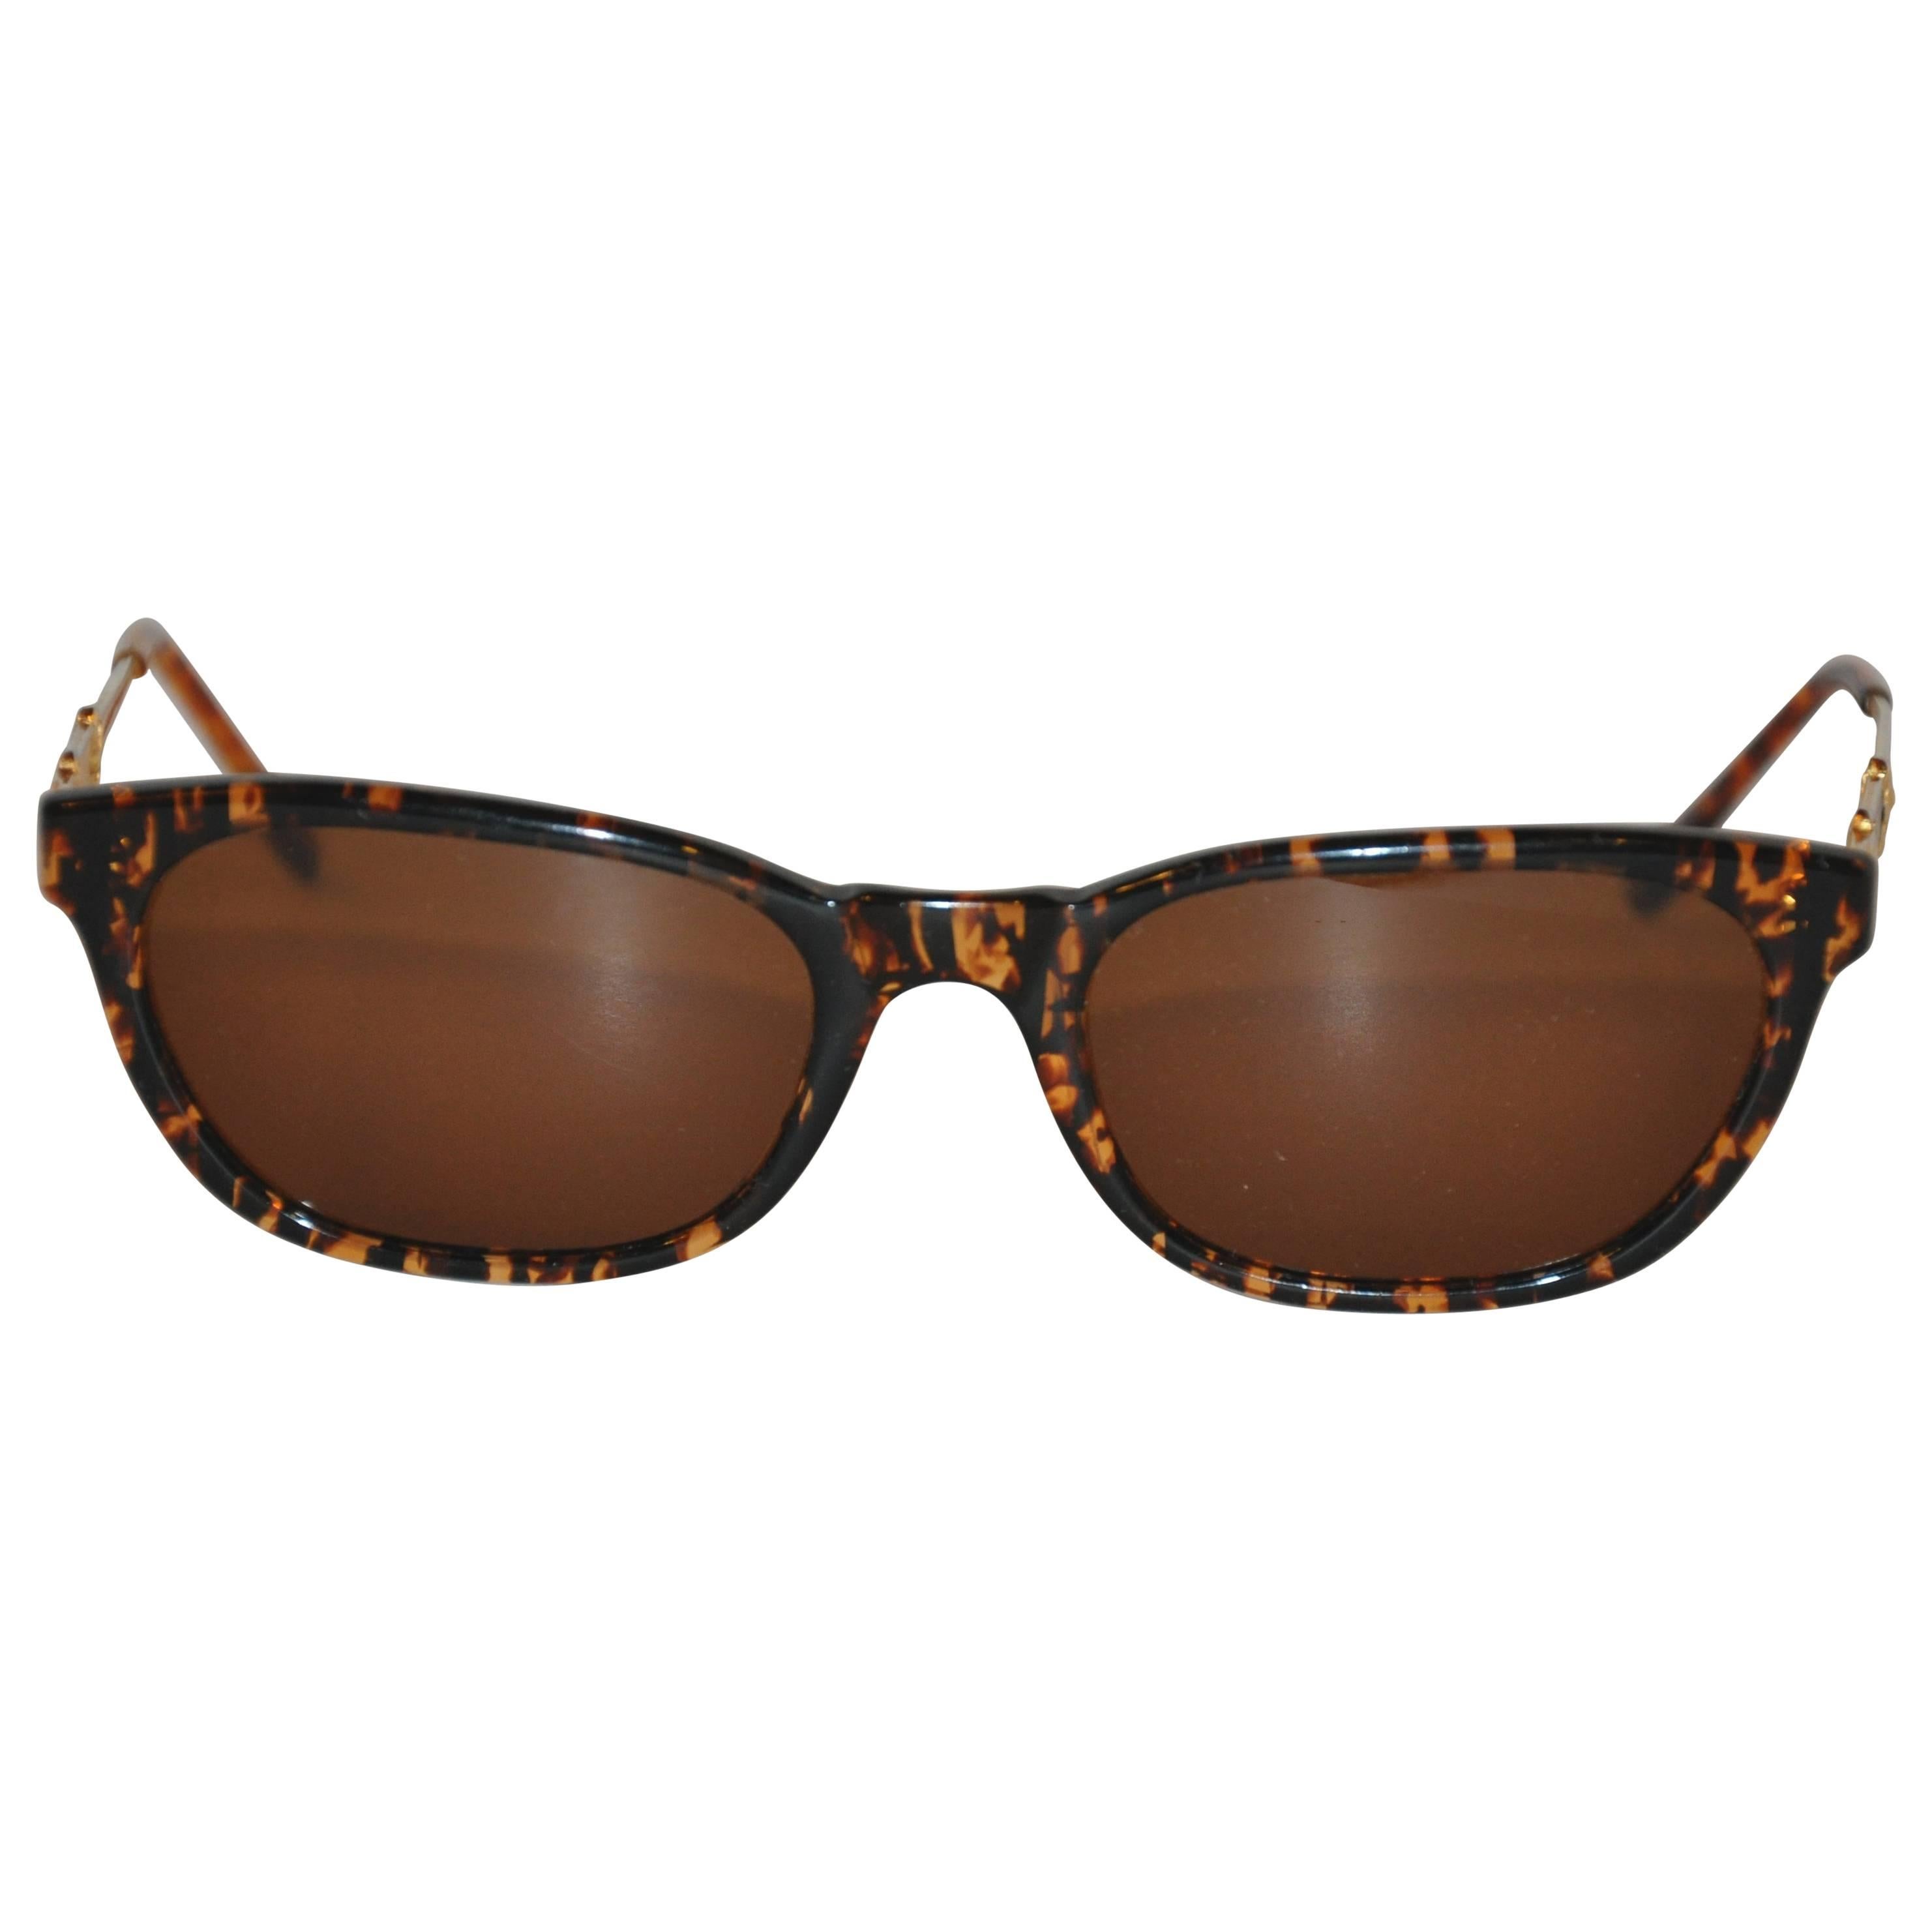 Moschino Tortoise Shell with Interior & Exterior Name-Plate Arms For Sale